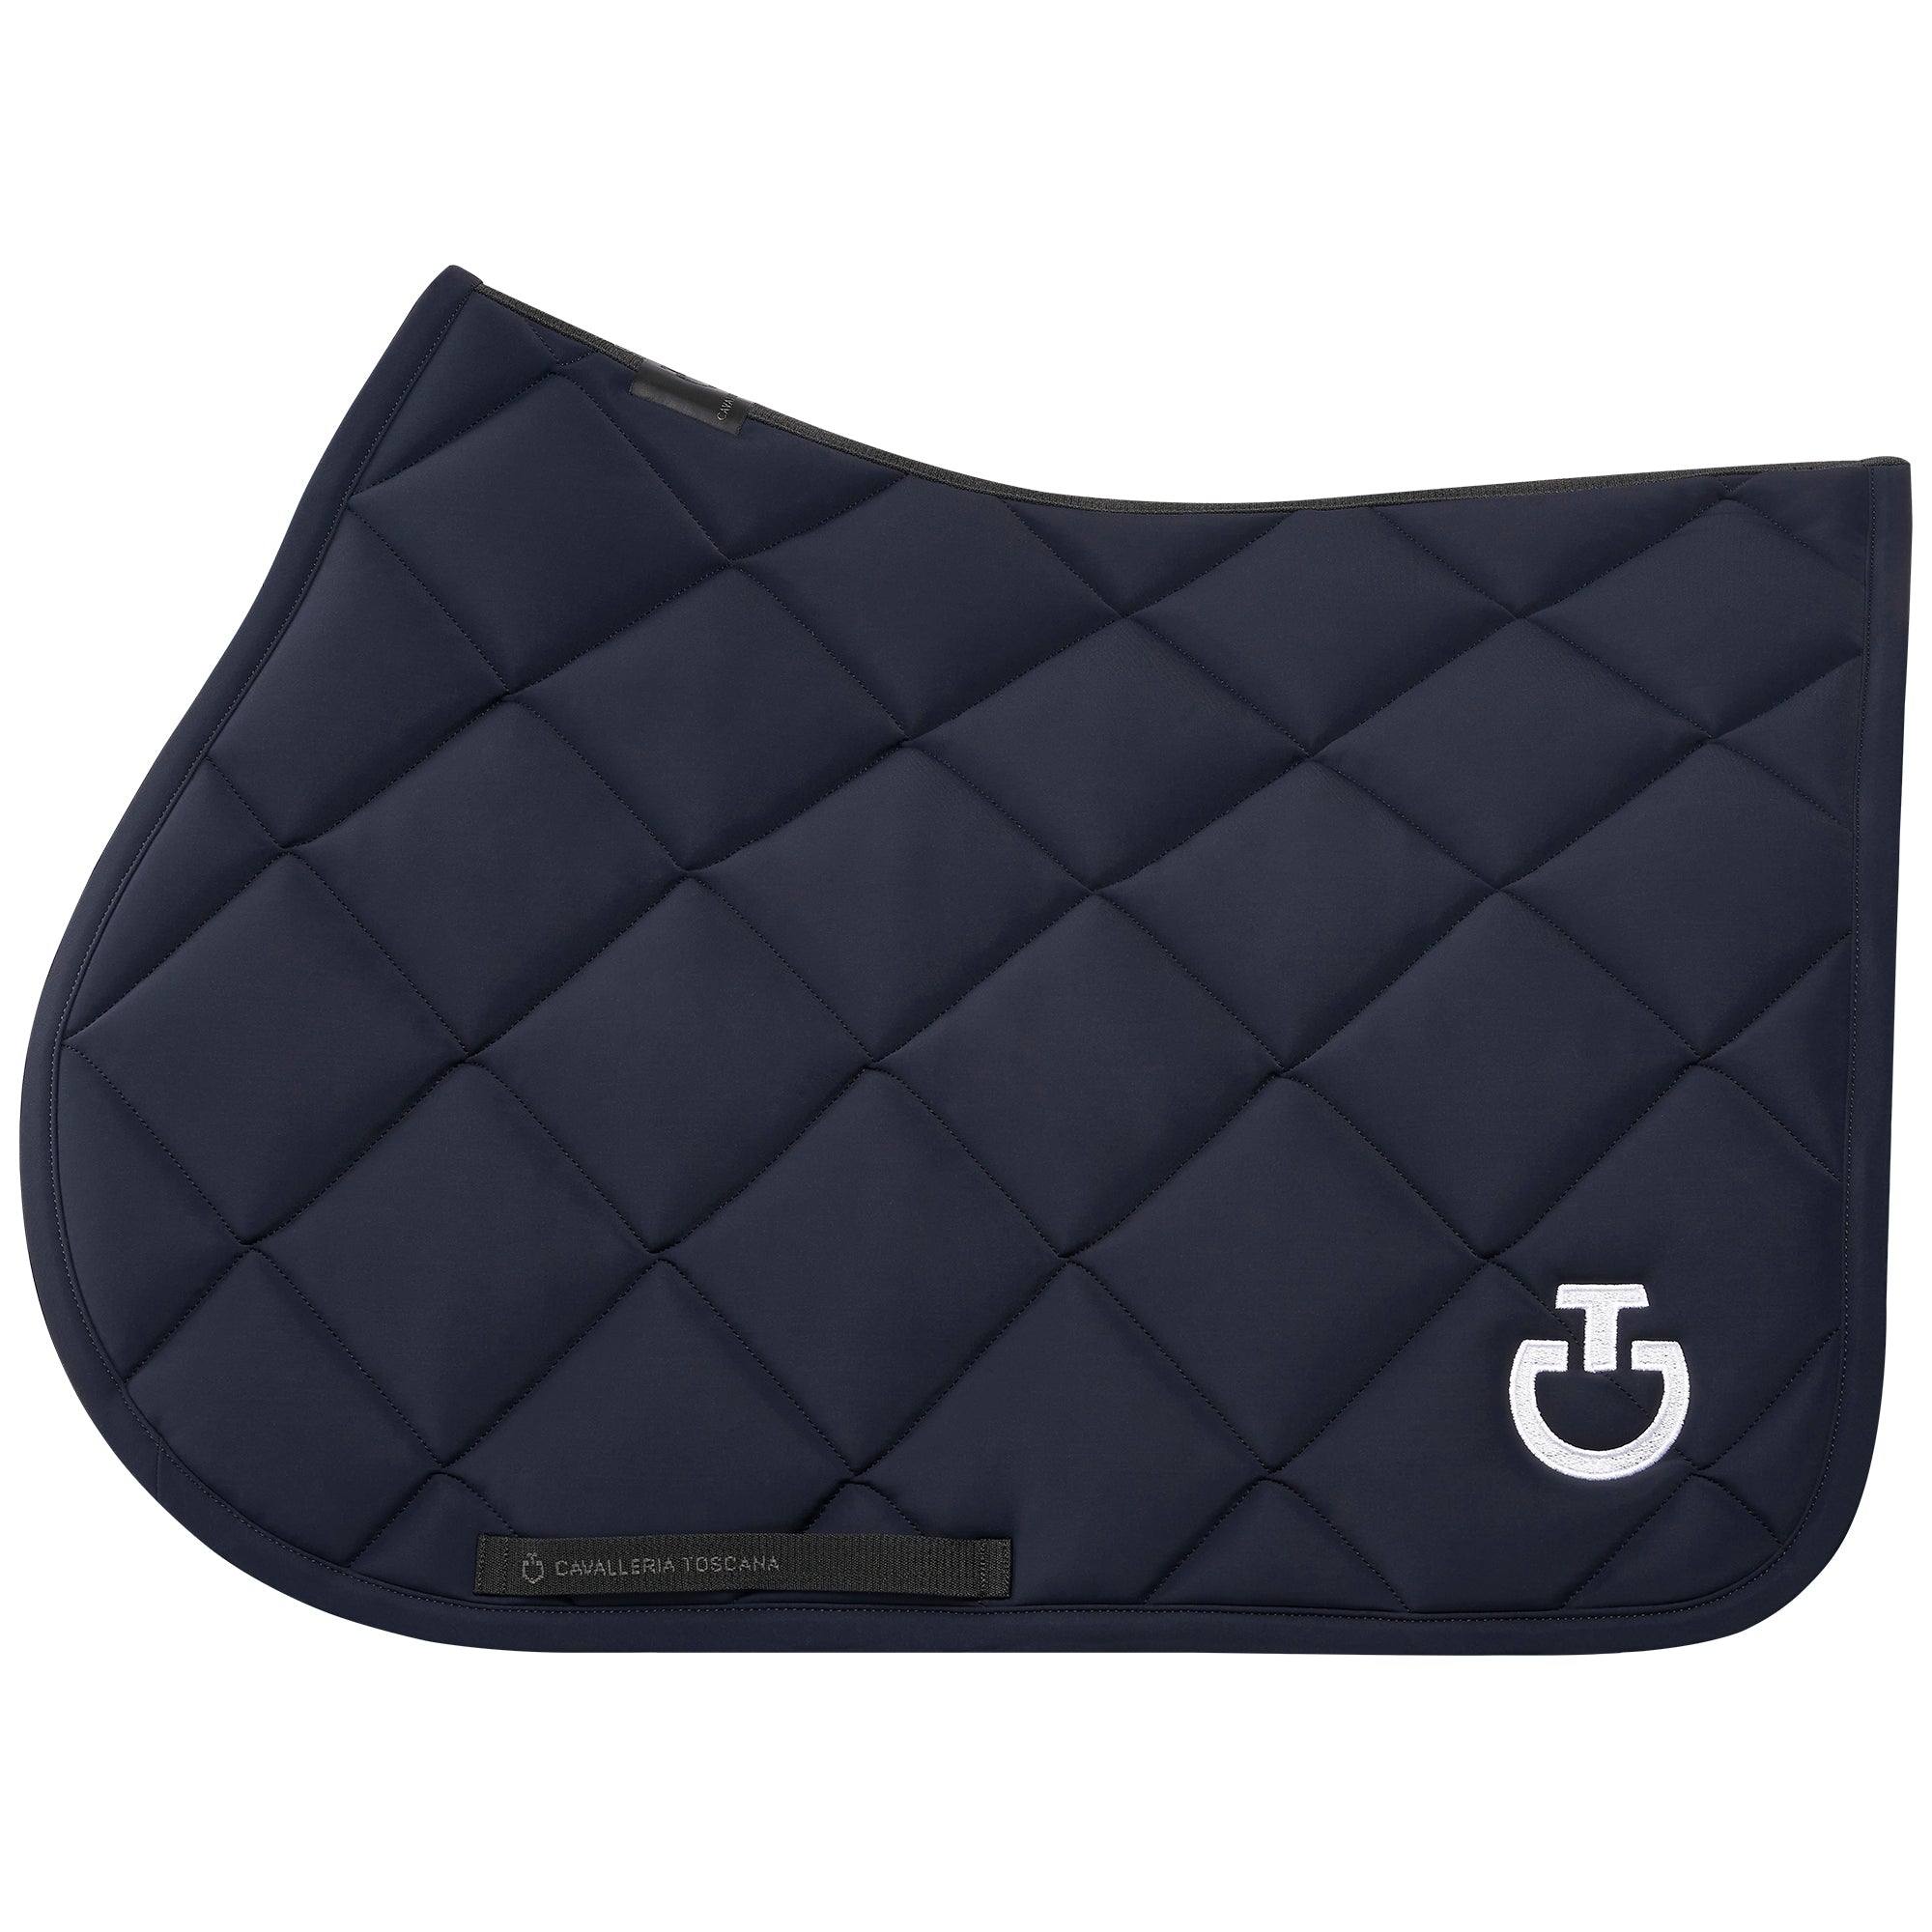 Diamond Quilted Jumping Saddle Pad made from breathable technical jersey.